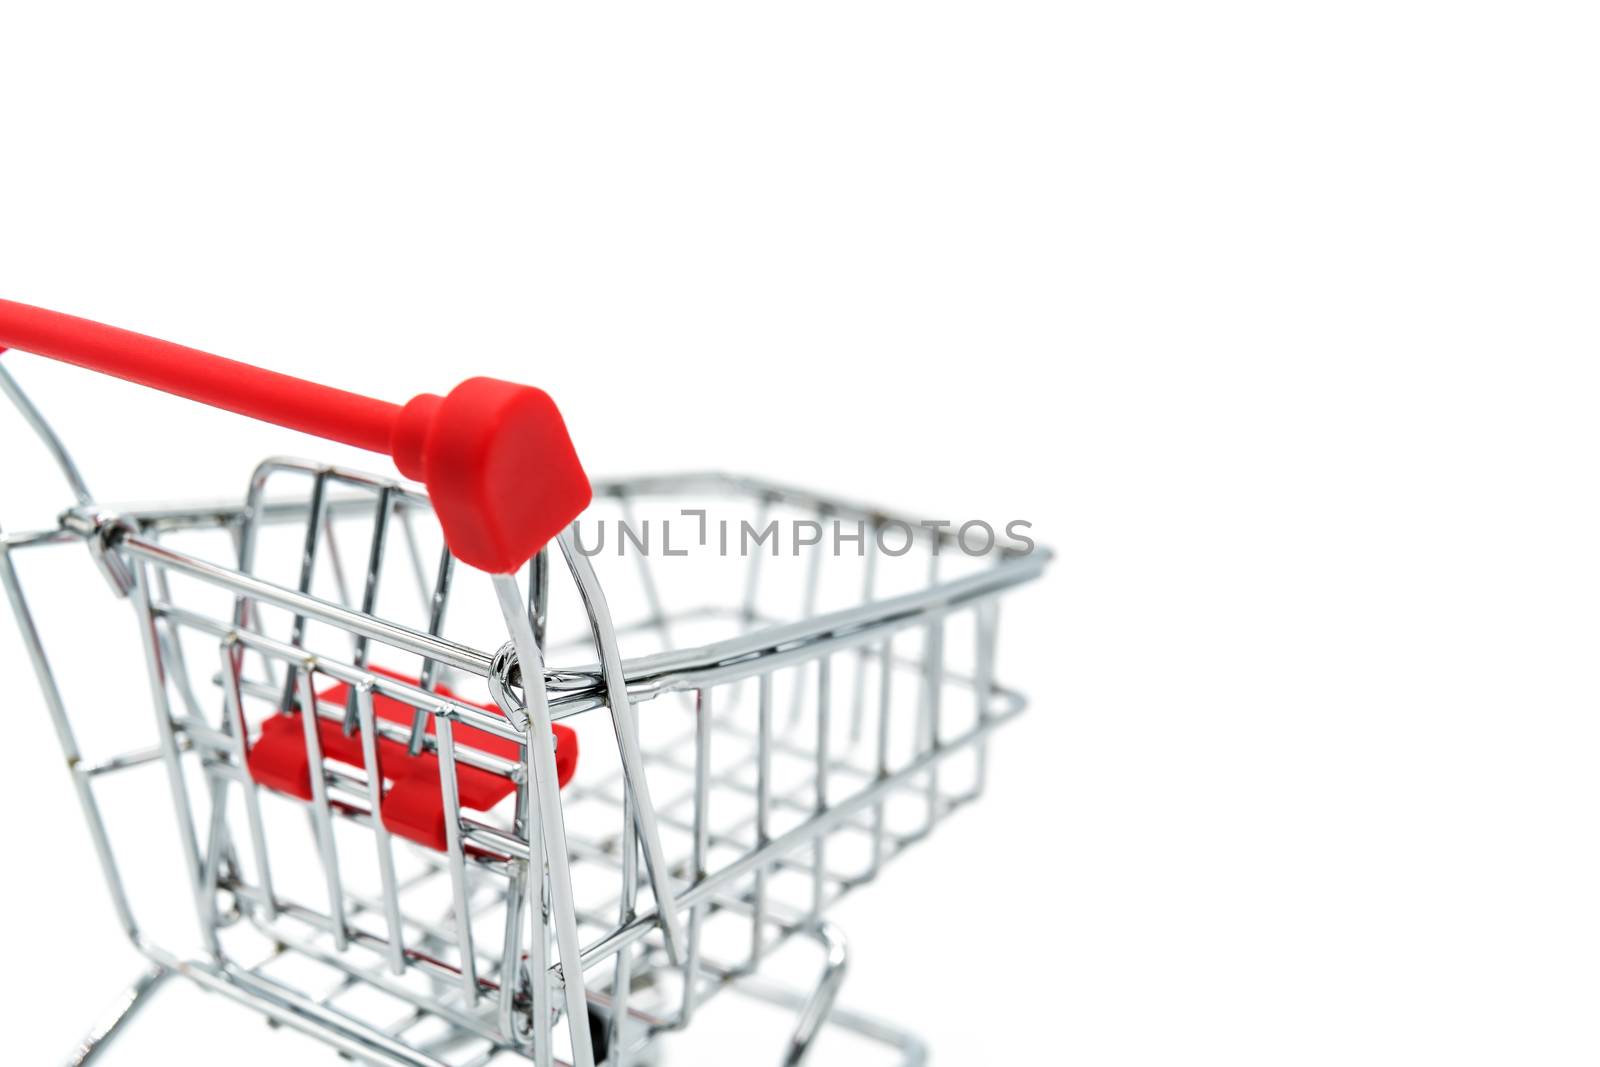 Empty shopping cart trolley isolated on white backgrounds